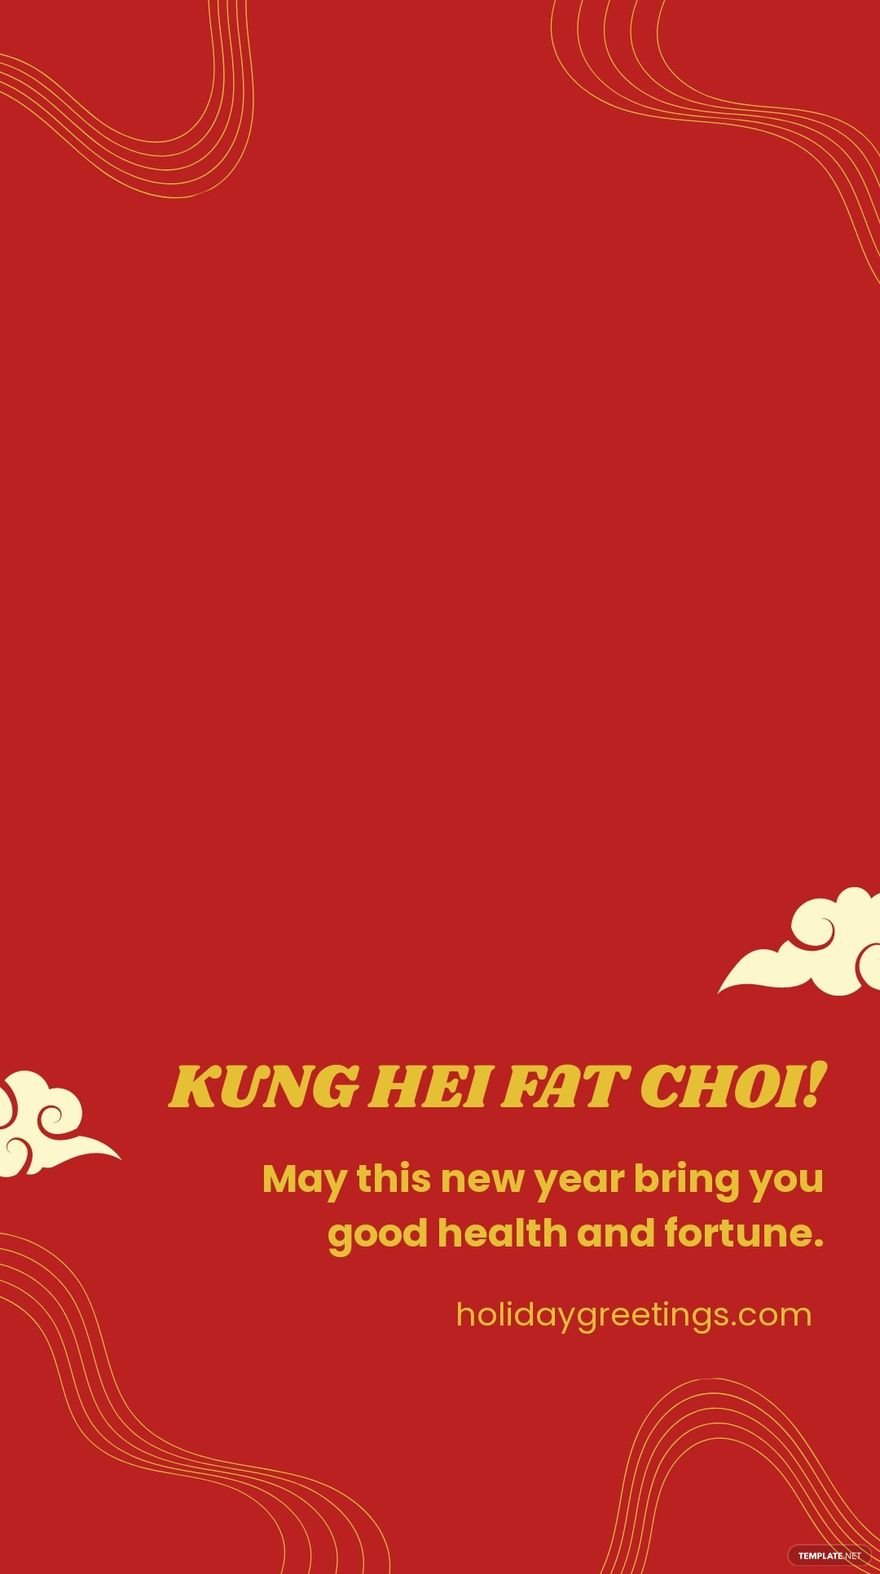 Happy Chinese New Year Snapchat Geofilter